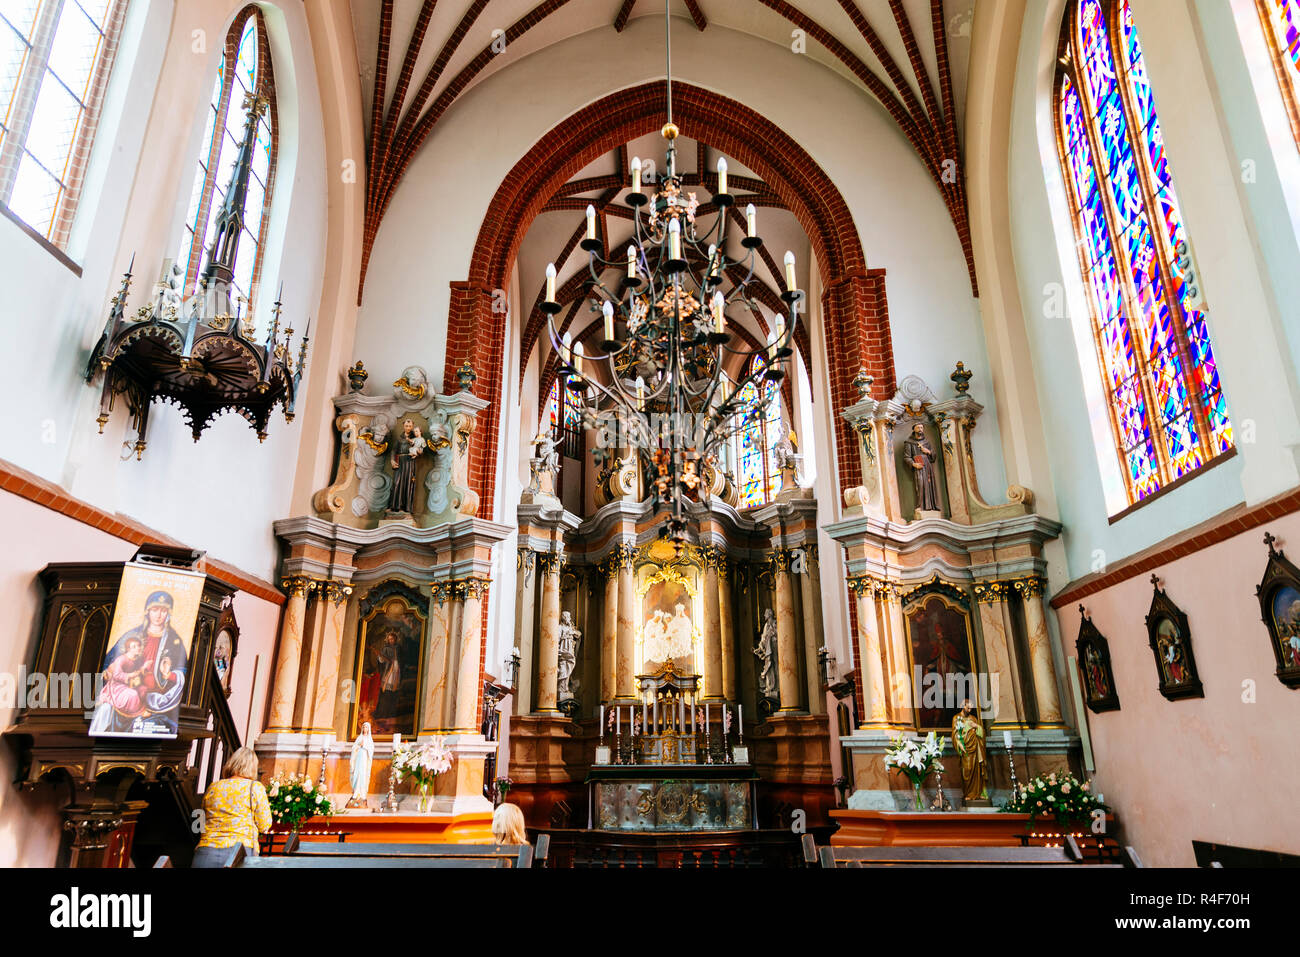 Nave and main altar, St. Anne's Church is a Roman Catholic church in Vilnius Old Town. It is a prominent example of both Flamboyant Gothic and Brick G Stock Photo